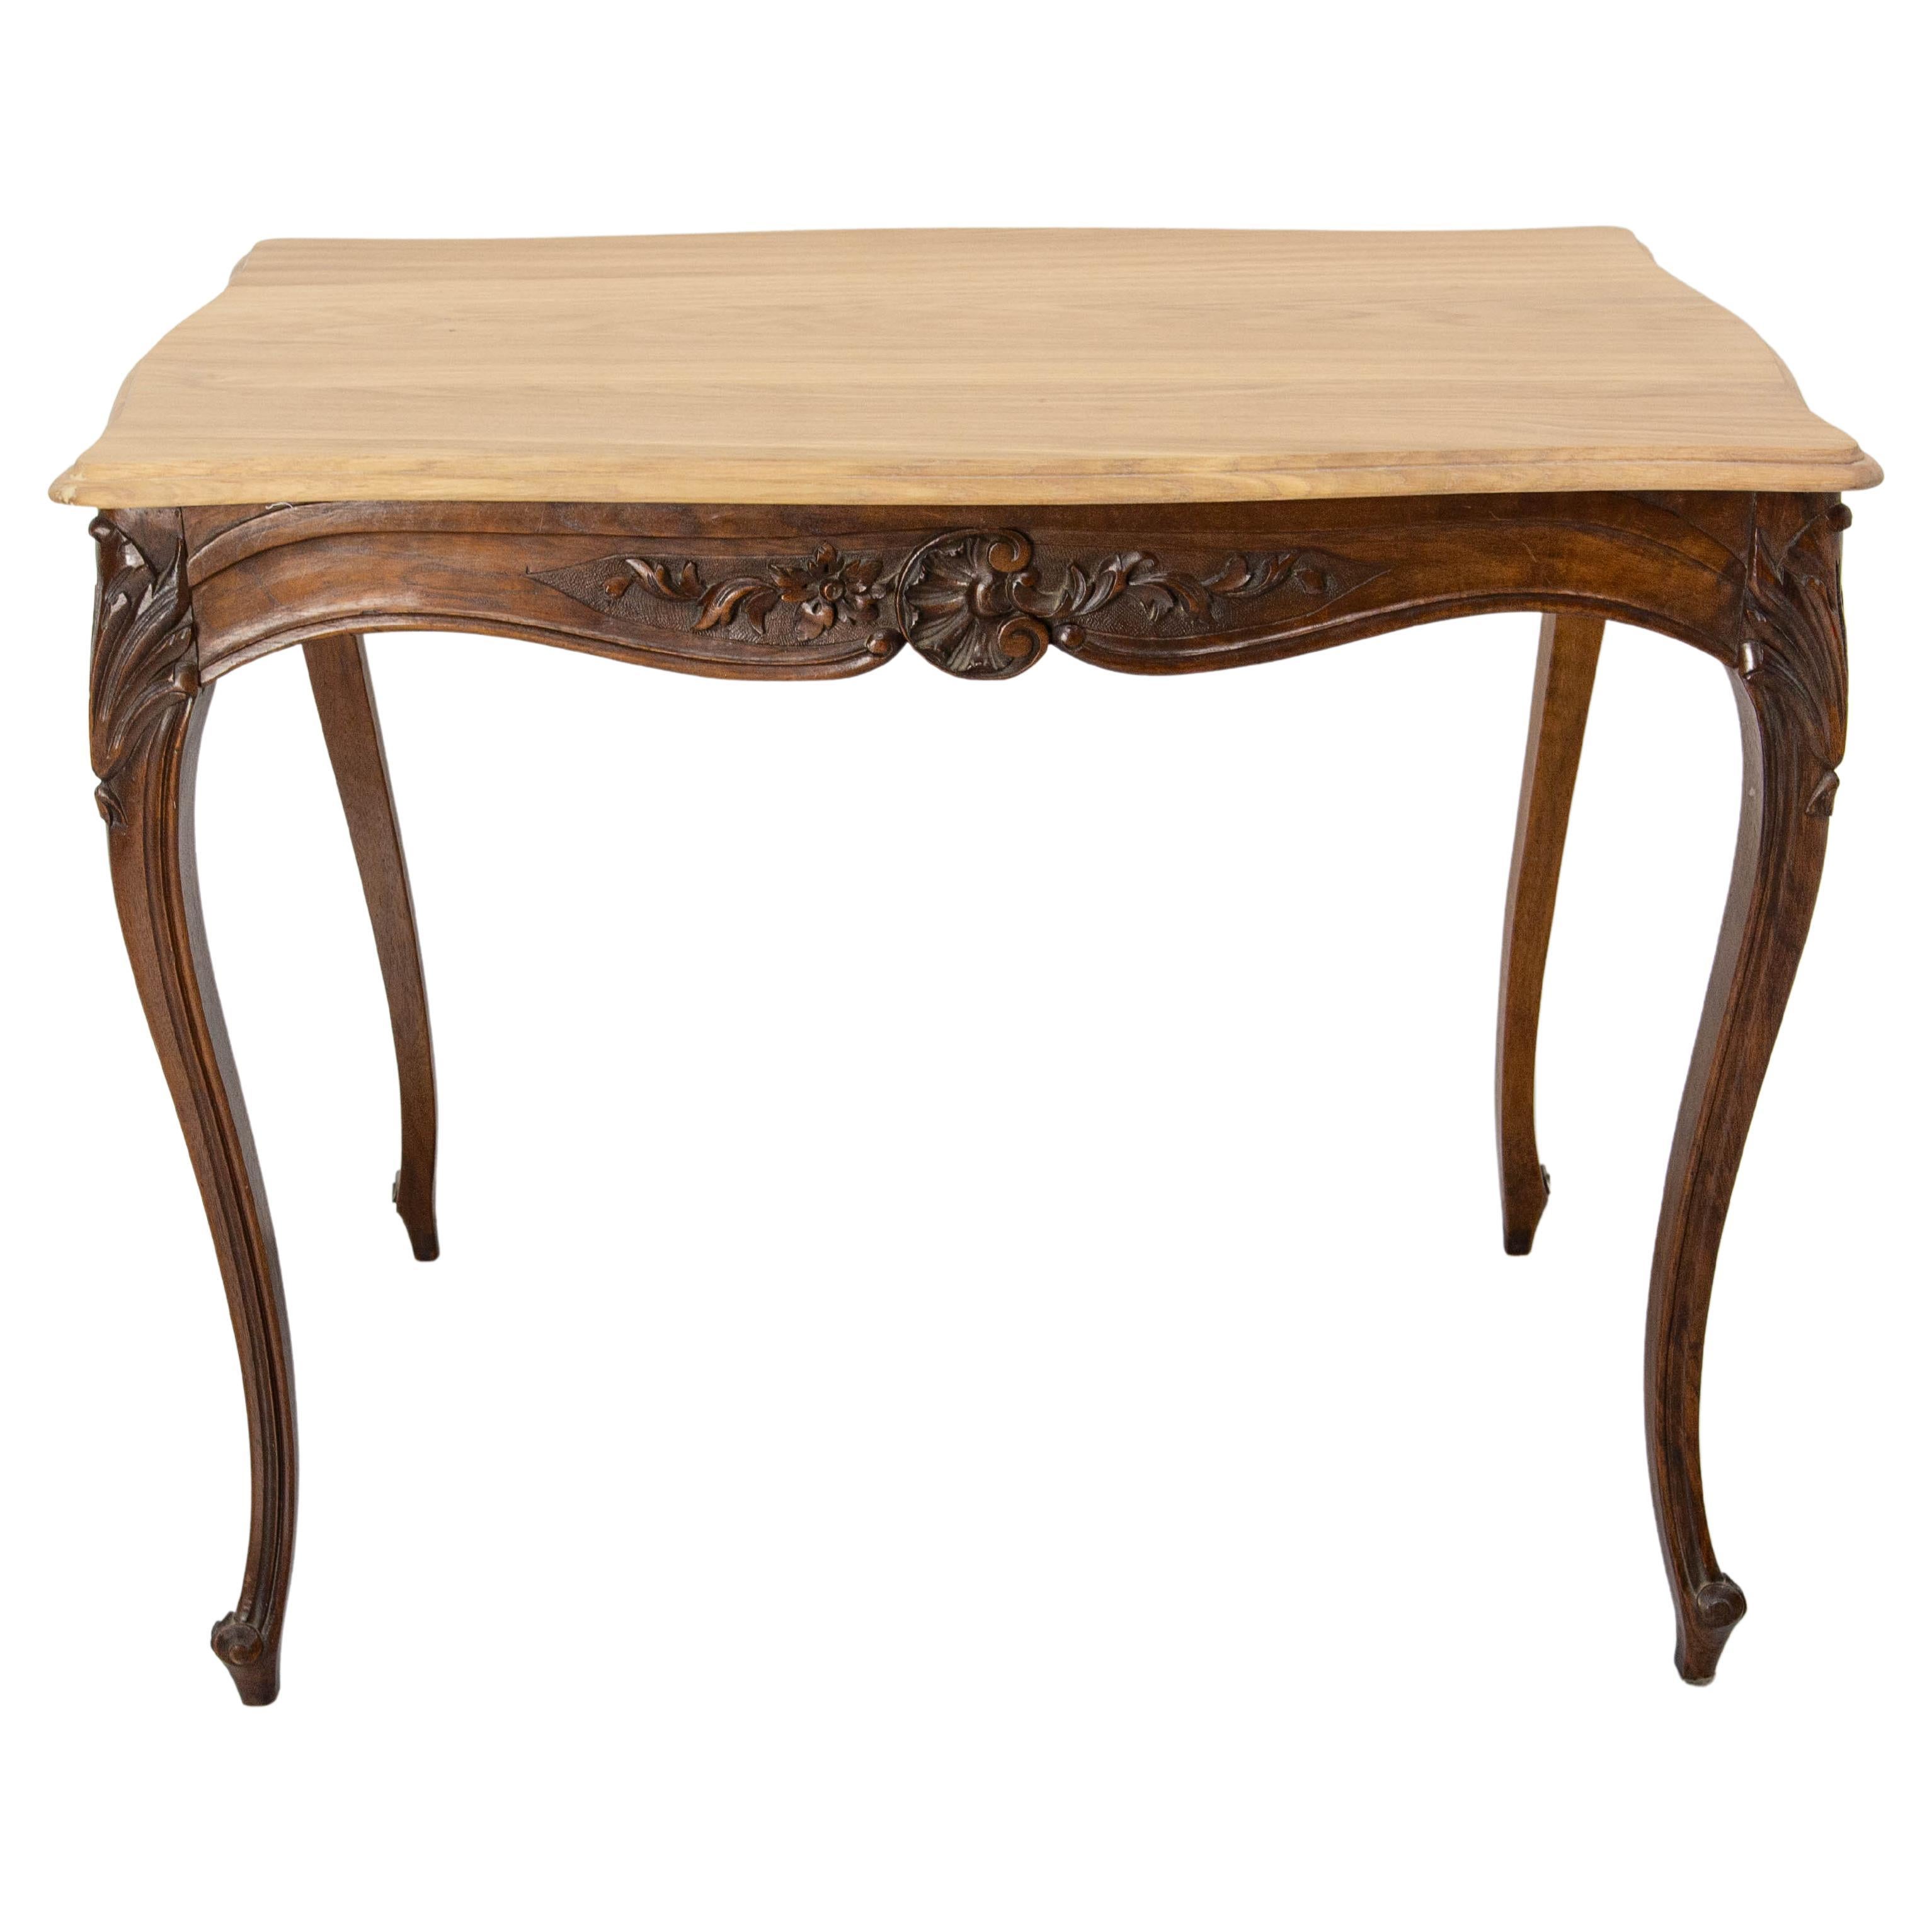 French Walnut & Oak Side Table in the Louis XV Style with Hiden Drawer, c. 1900 For Sale